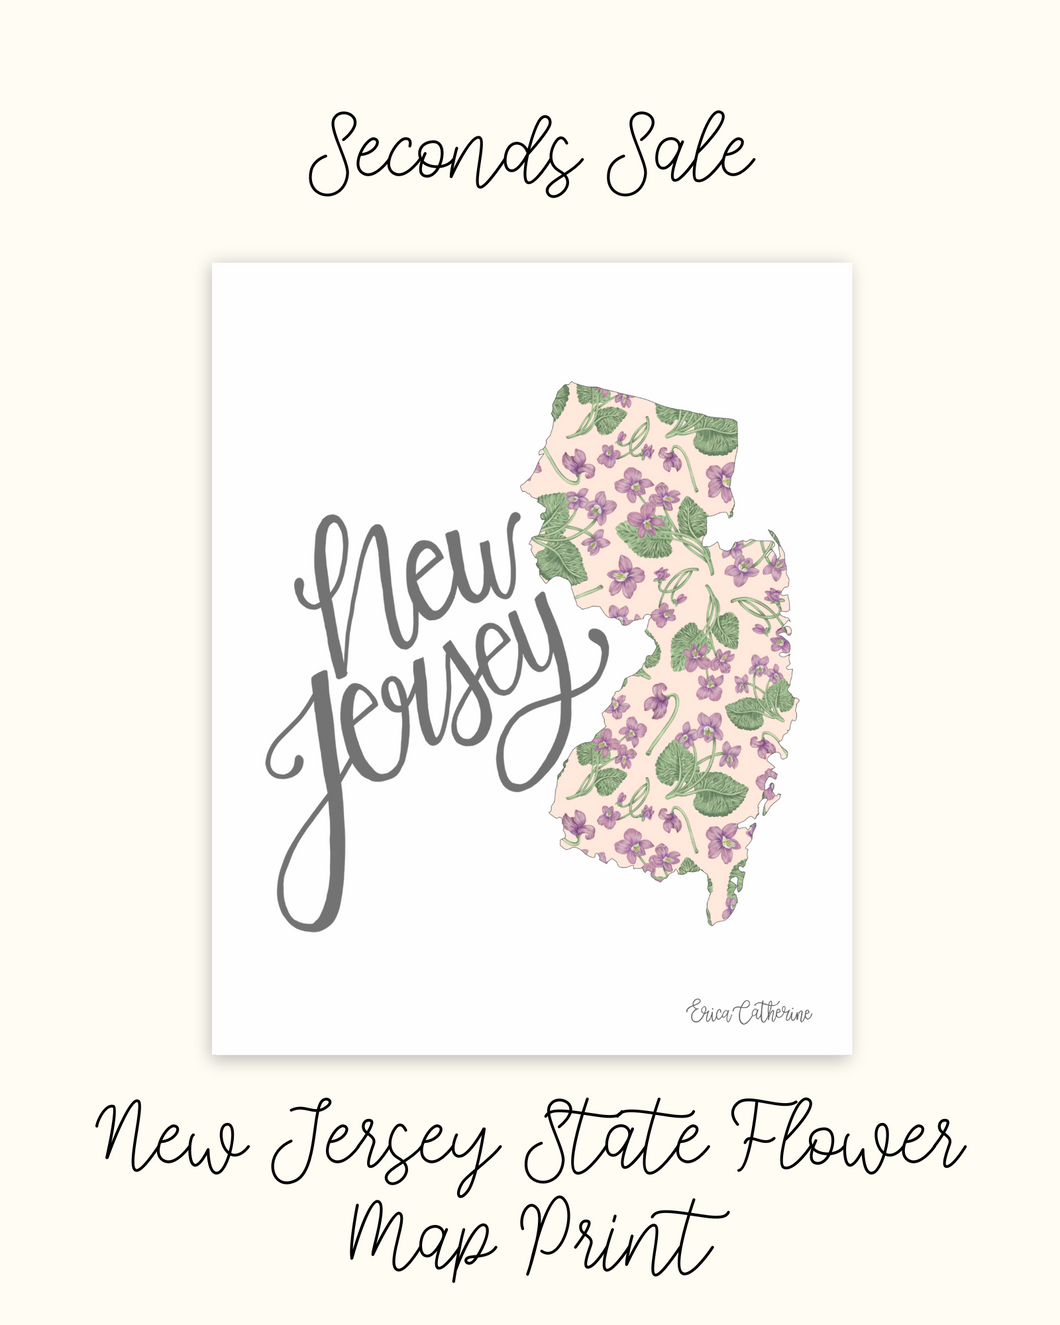 New Jersey State Flower Map Print - Seconds Sale